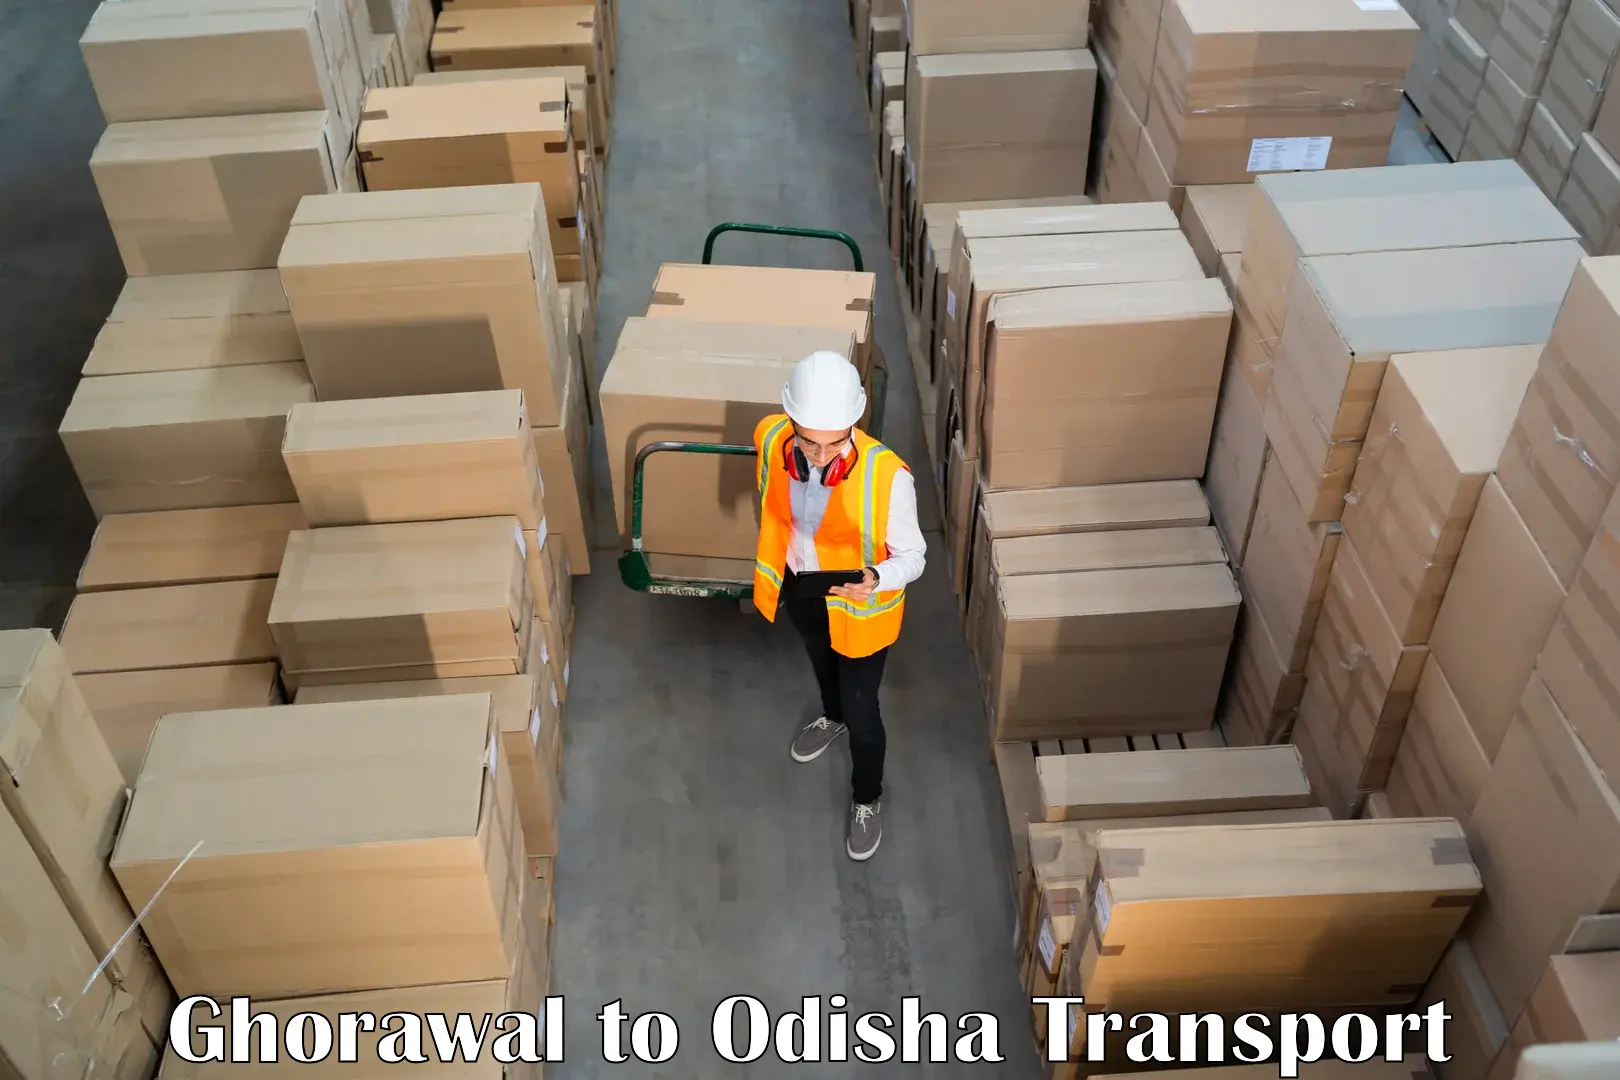 Part load transport service in India Ghorawal to Puri